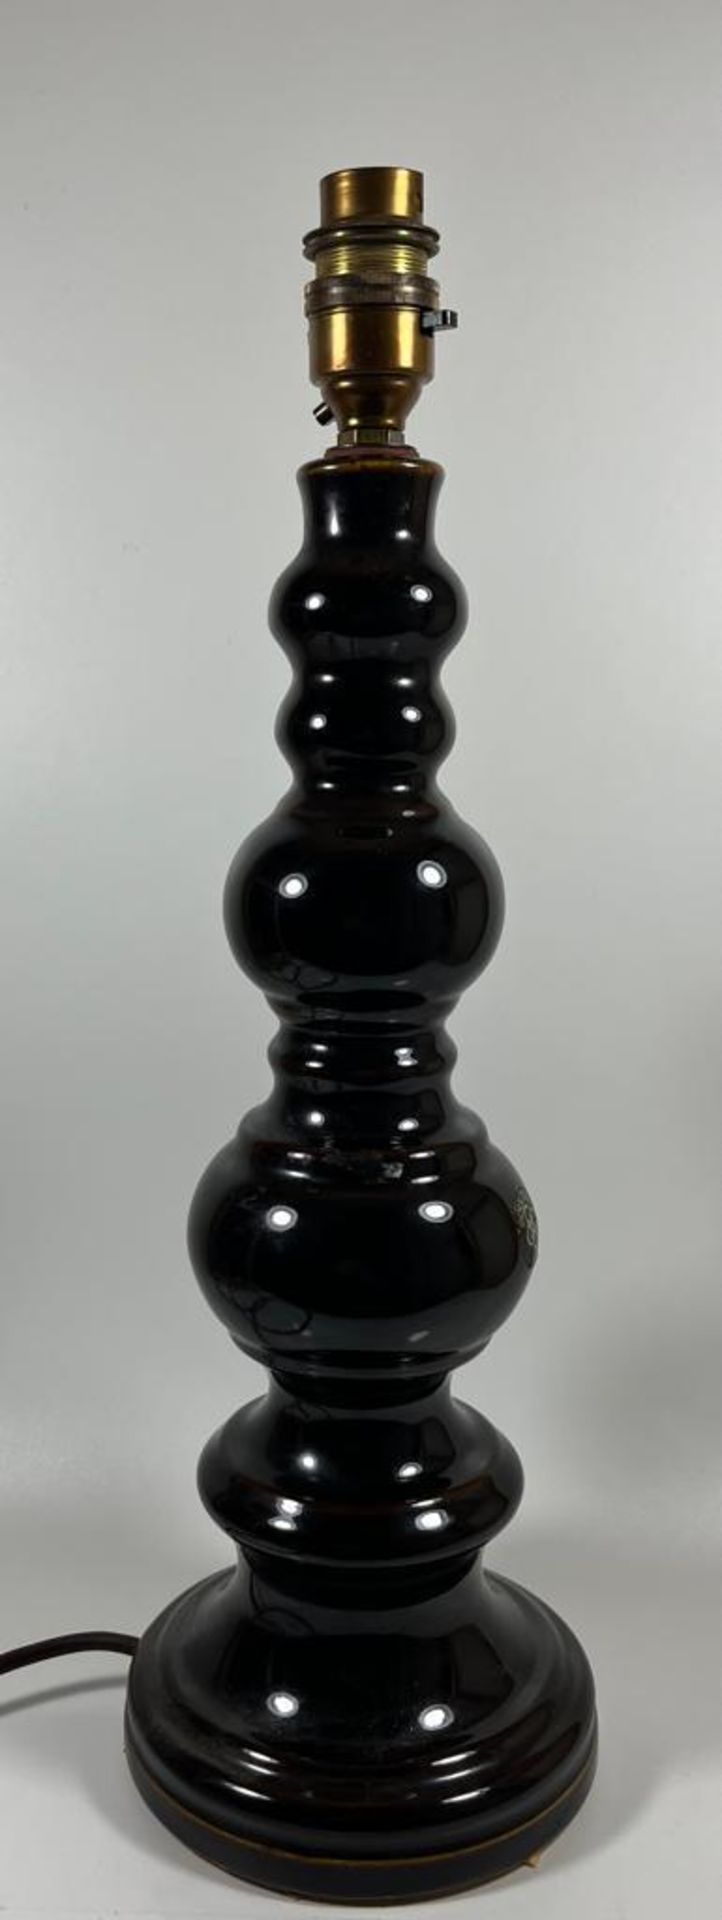 A ROYAL DOULTON CHESNUT BROWN 'HOOPS' HOOPED DESIGN TABLE LAMP, HEIGHT 41 CM - Image 2 of 4